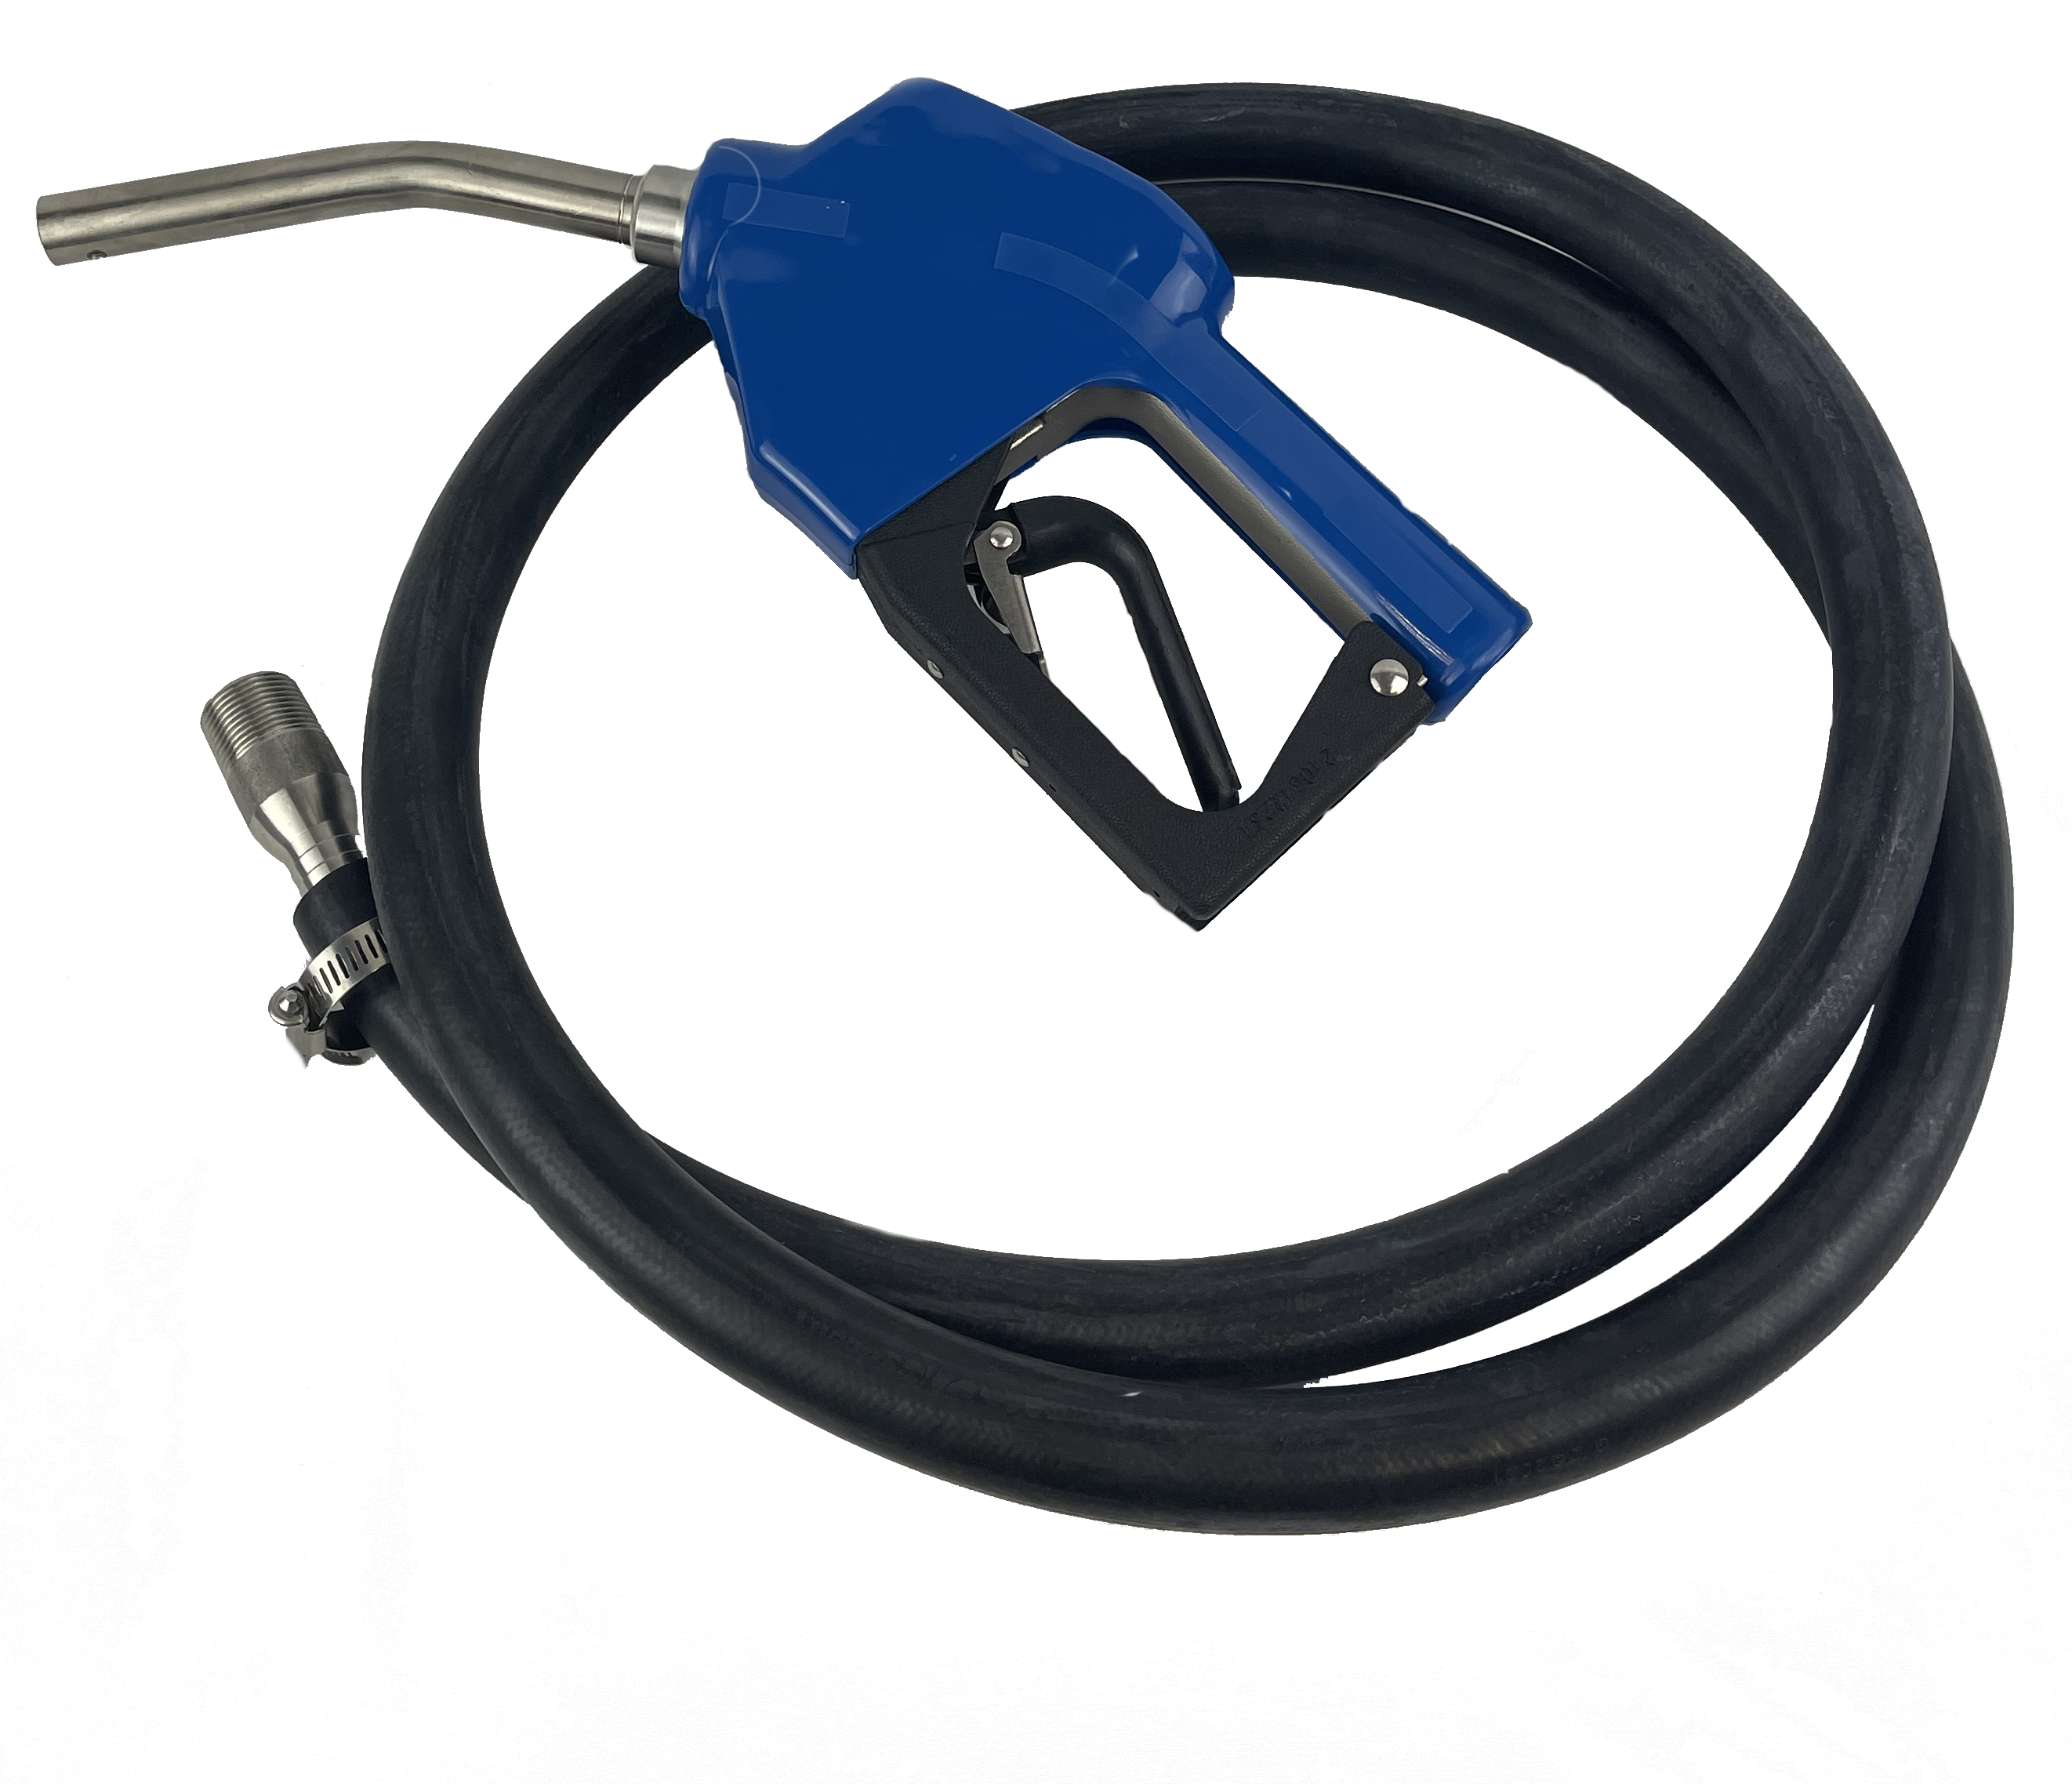 DEF Hose and Nozzle Kit Image